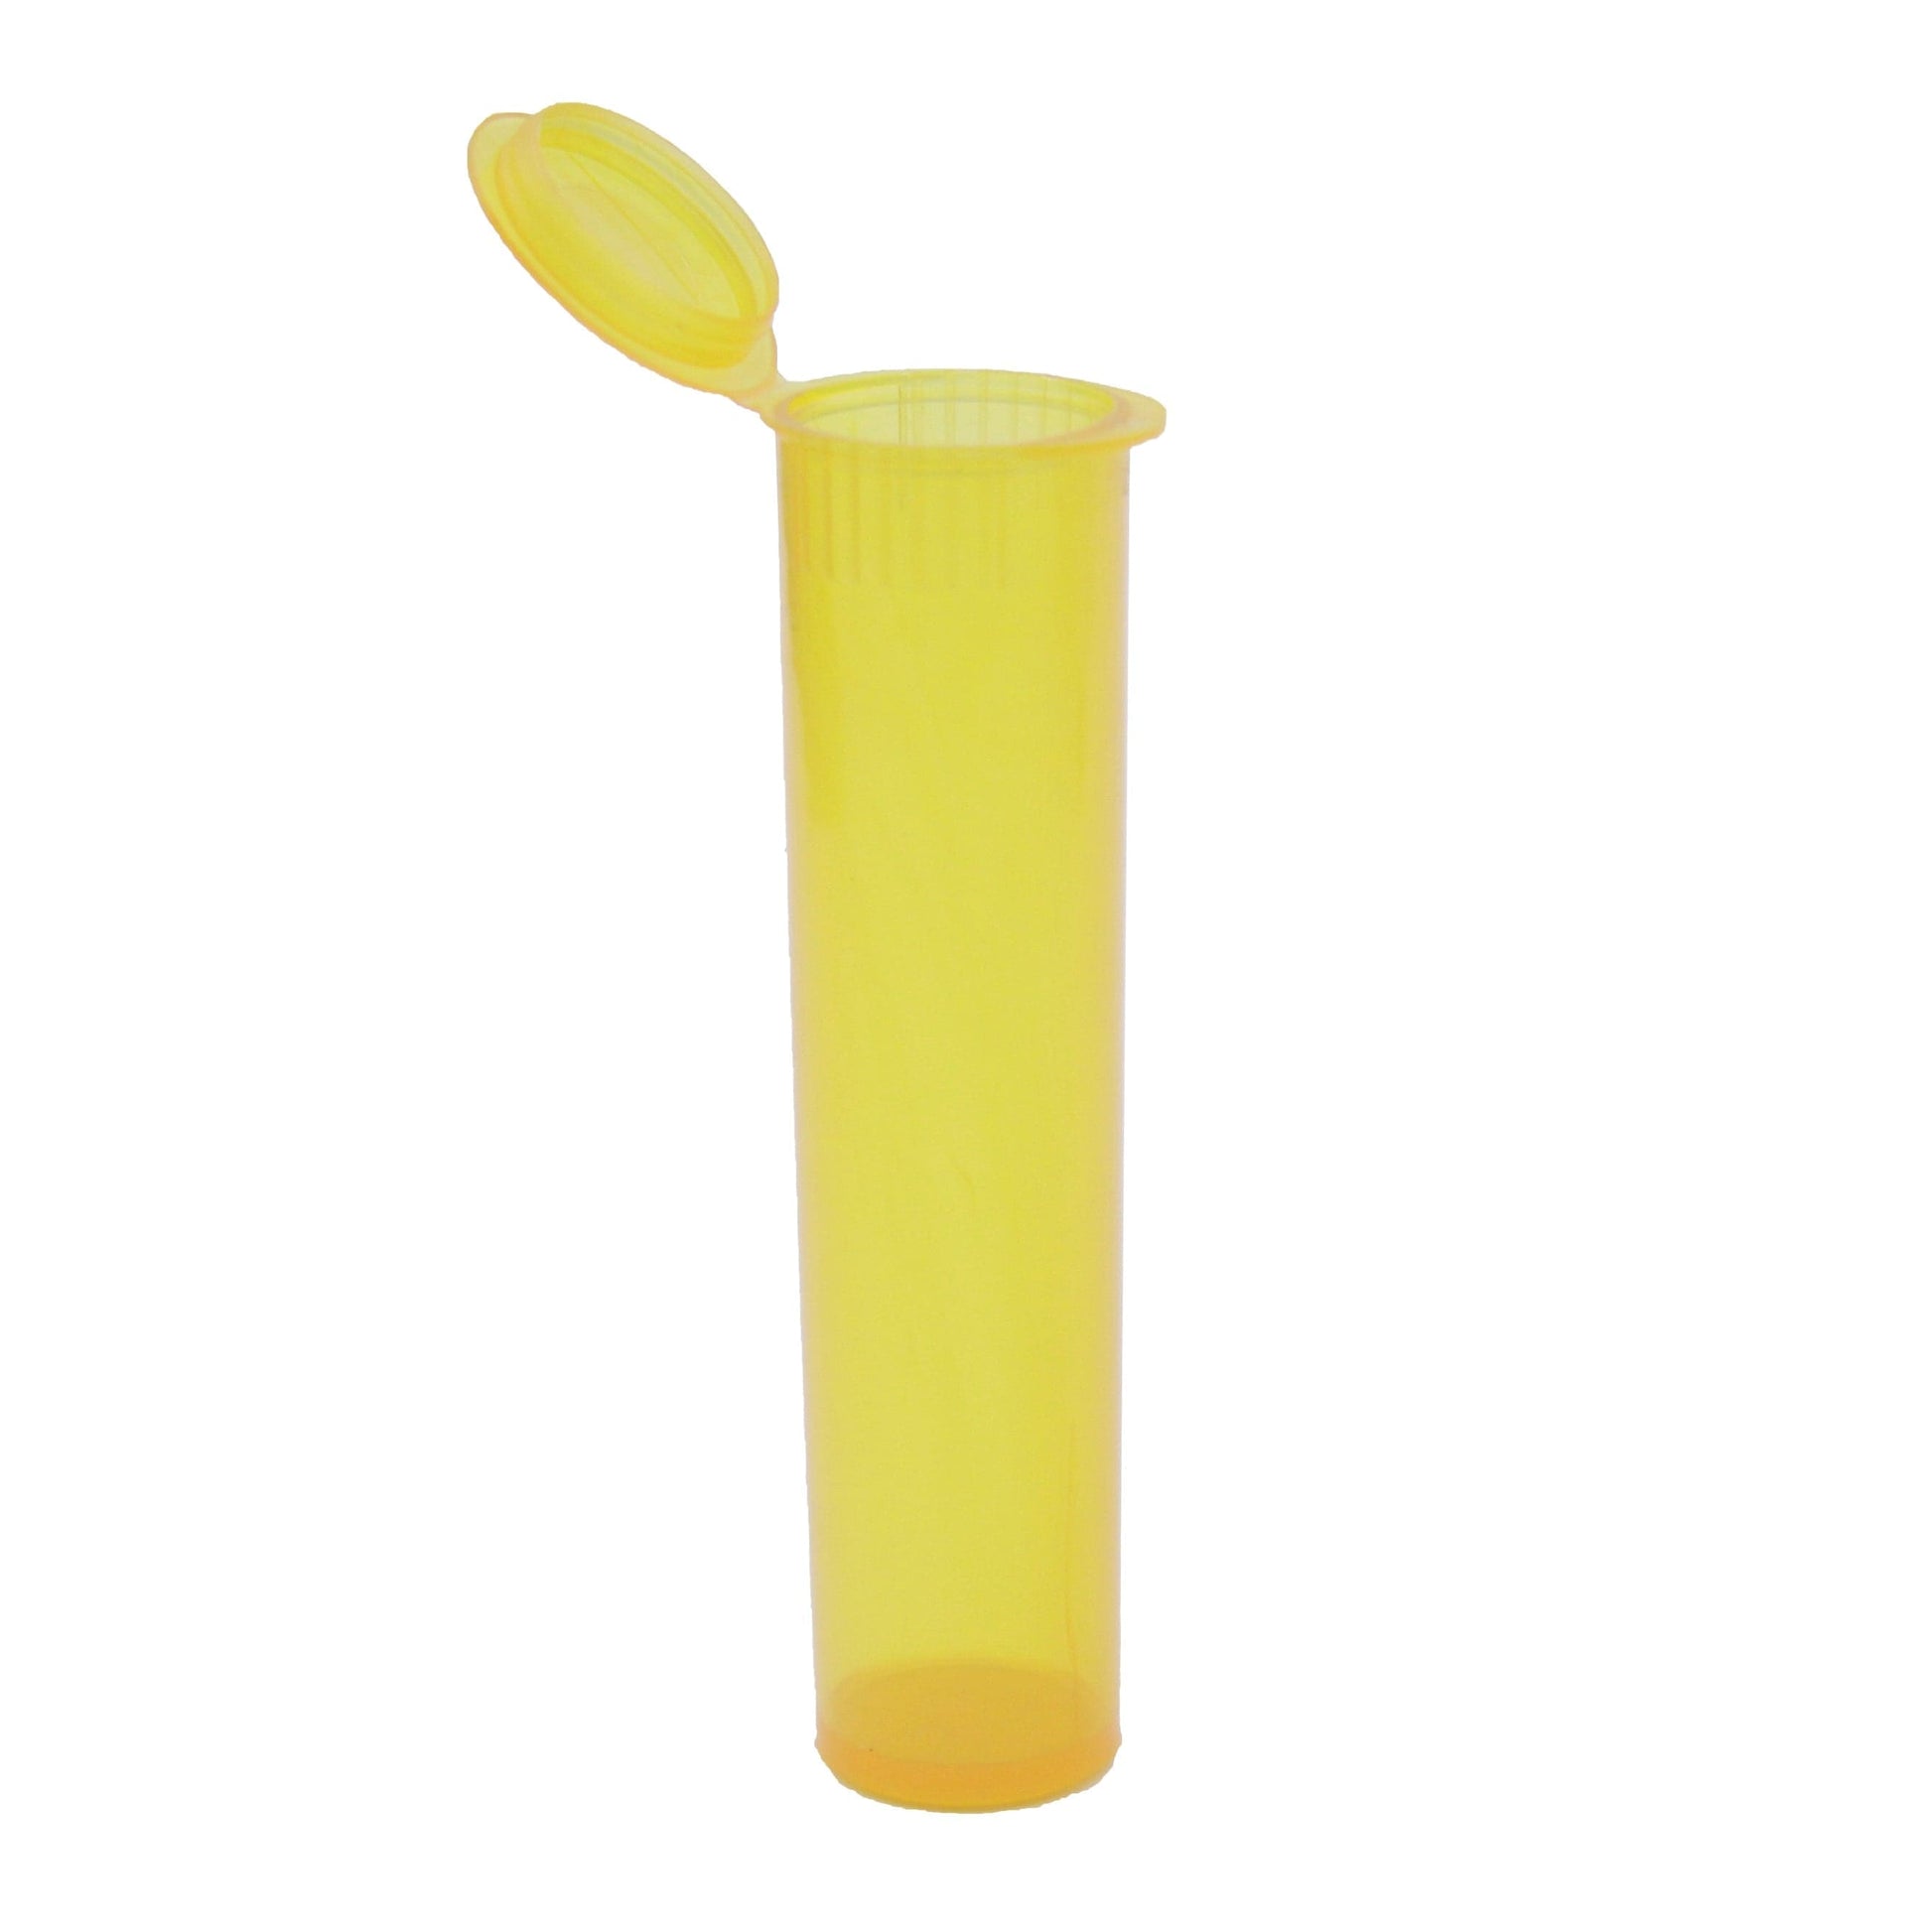 Translucent Yellow Translucent Squeeze Top Child-Resistant Pre-Roll Tube | 116 mm